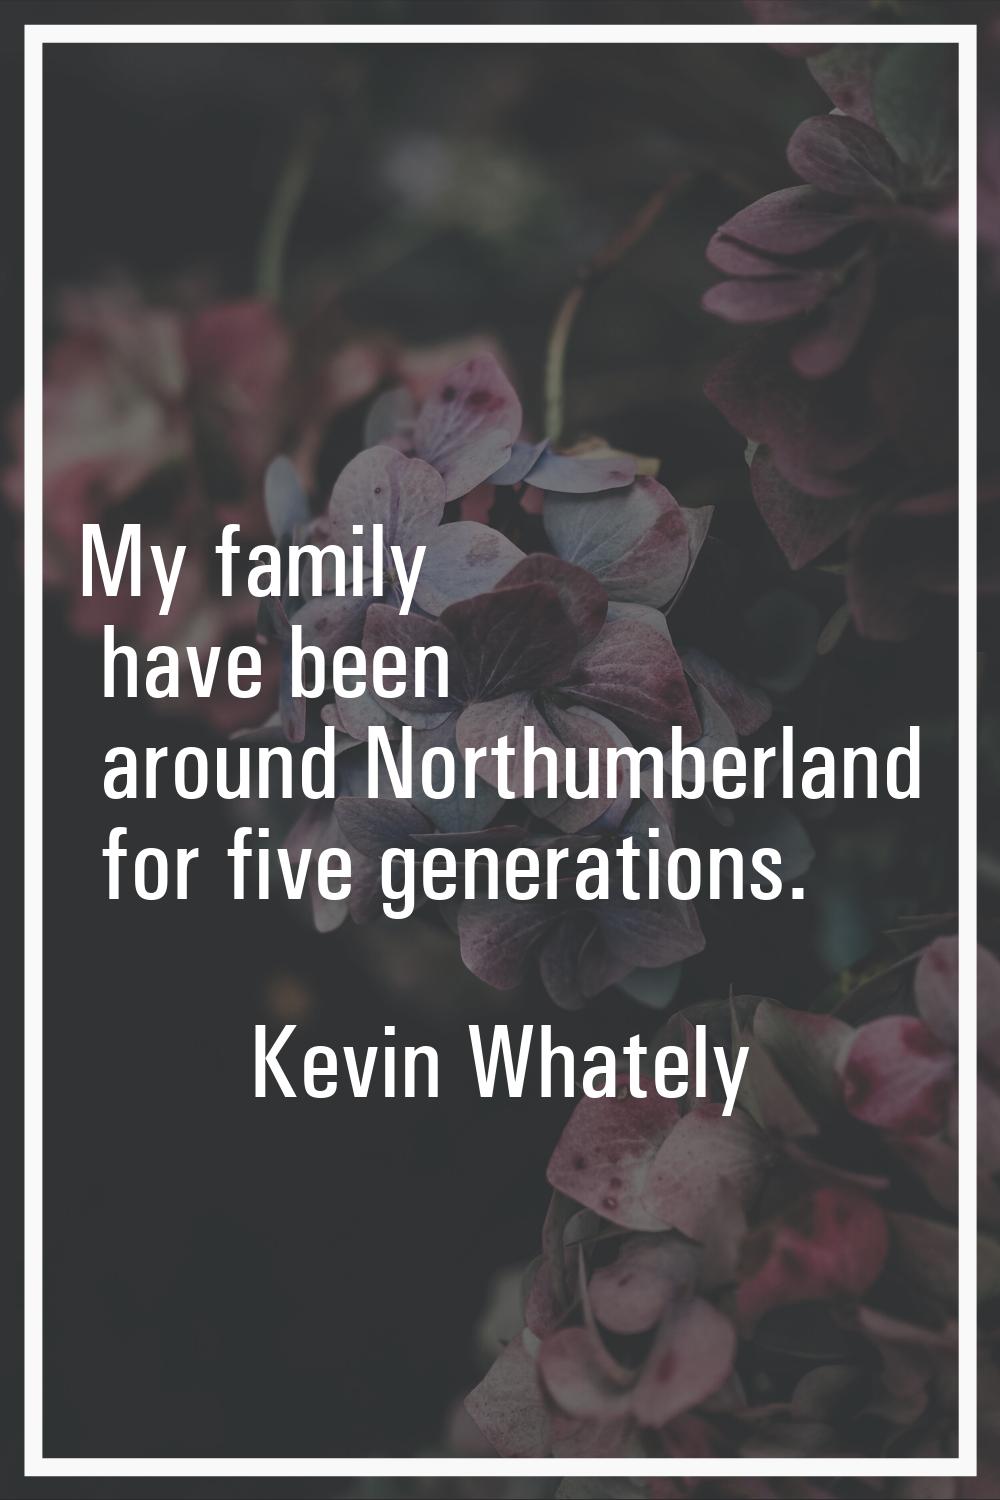 My family have been around Northumberland for five generations.